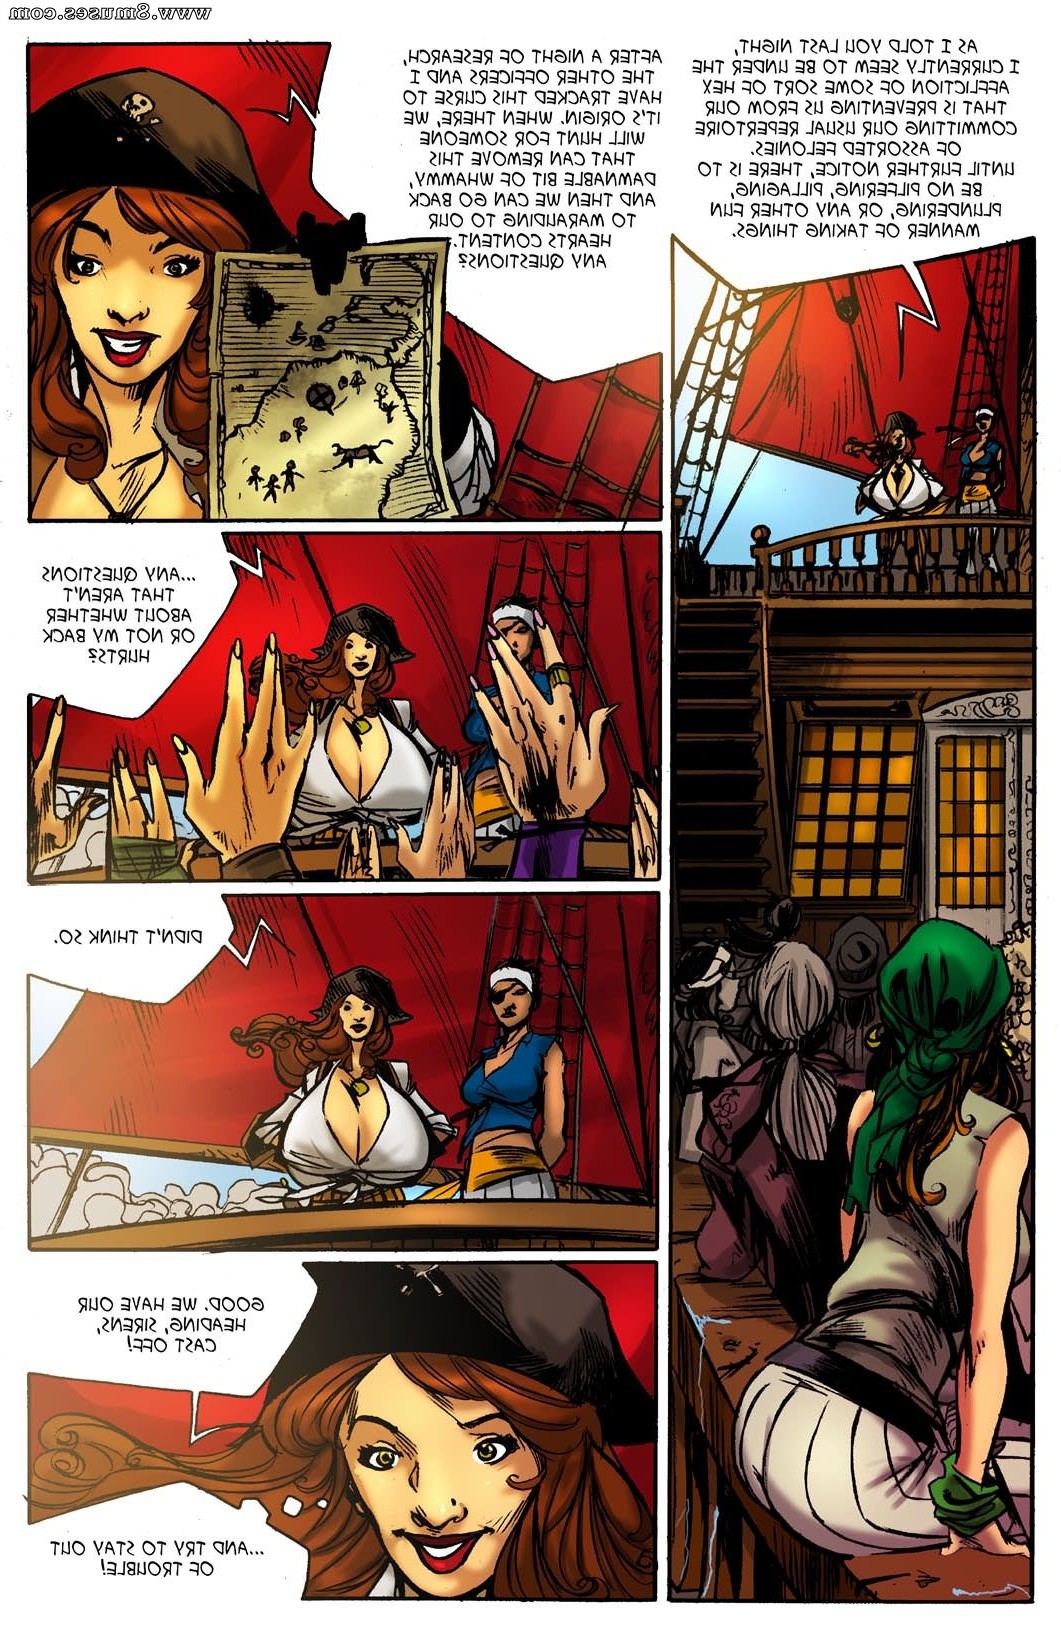 BE-Story-Club-Comics/A-Pirates-Life/Issue-2 A_Pirates_Life_-_Issue_2_10.jpg